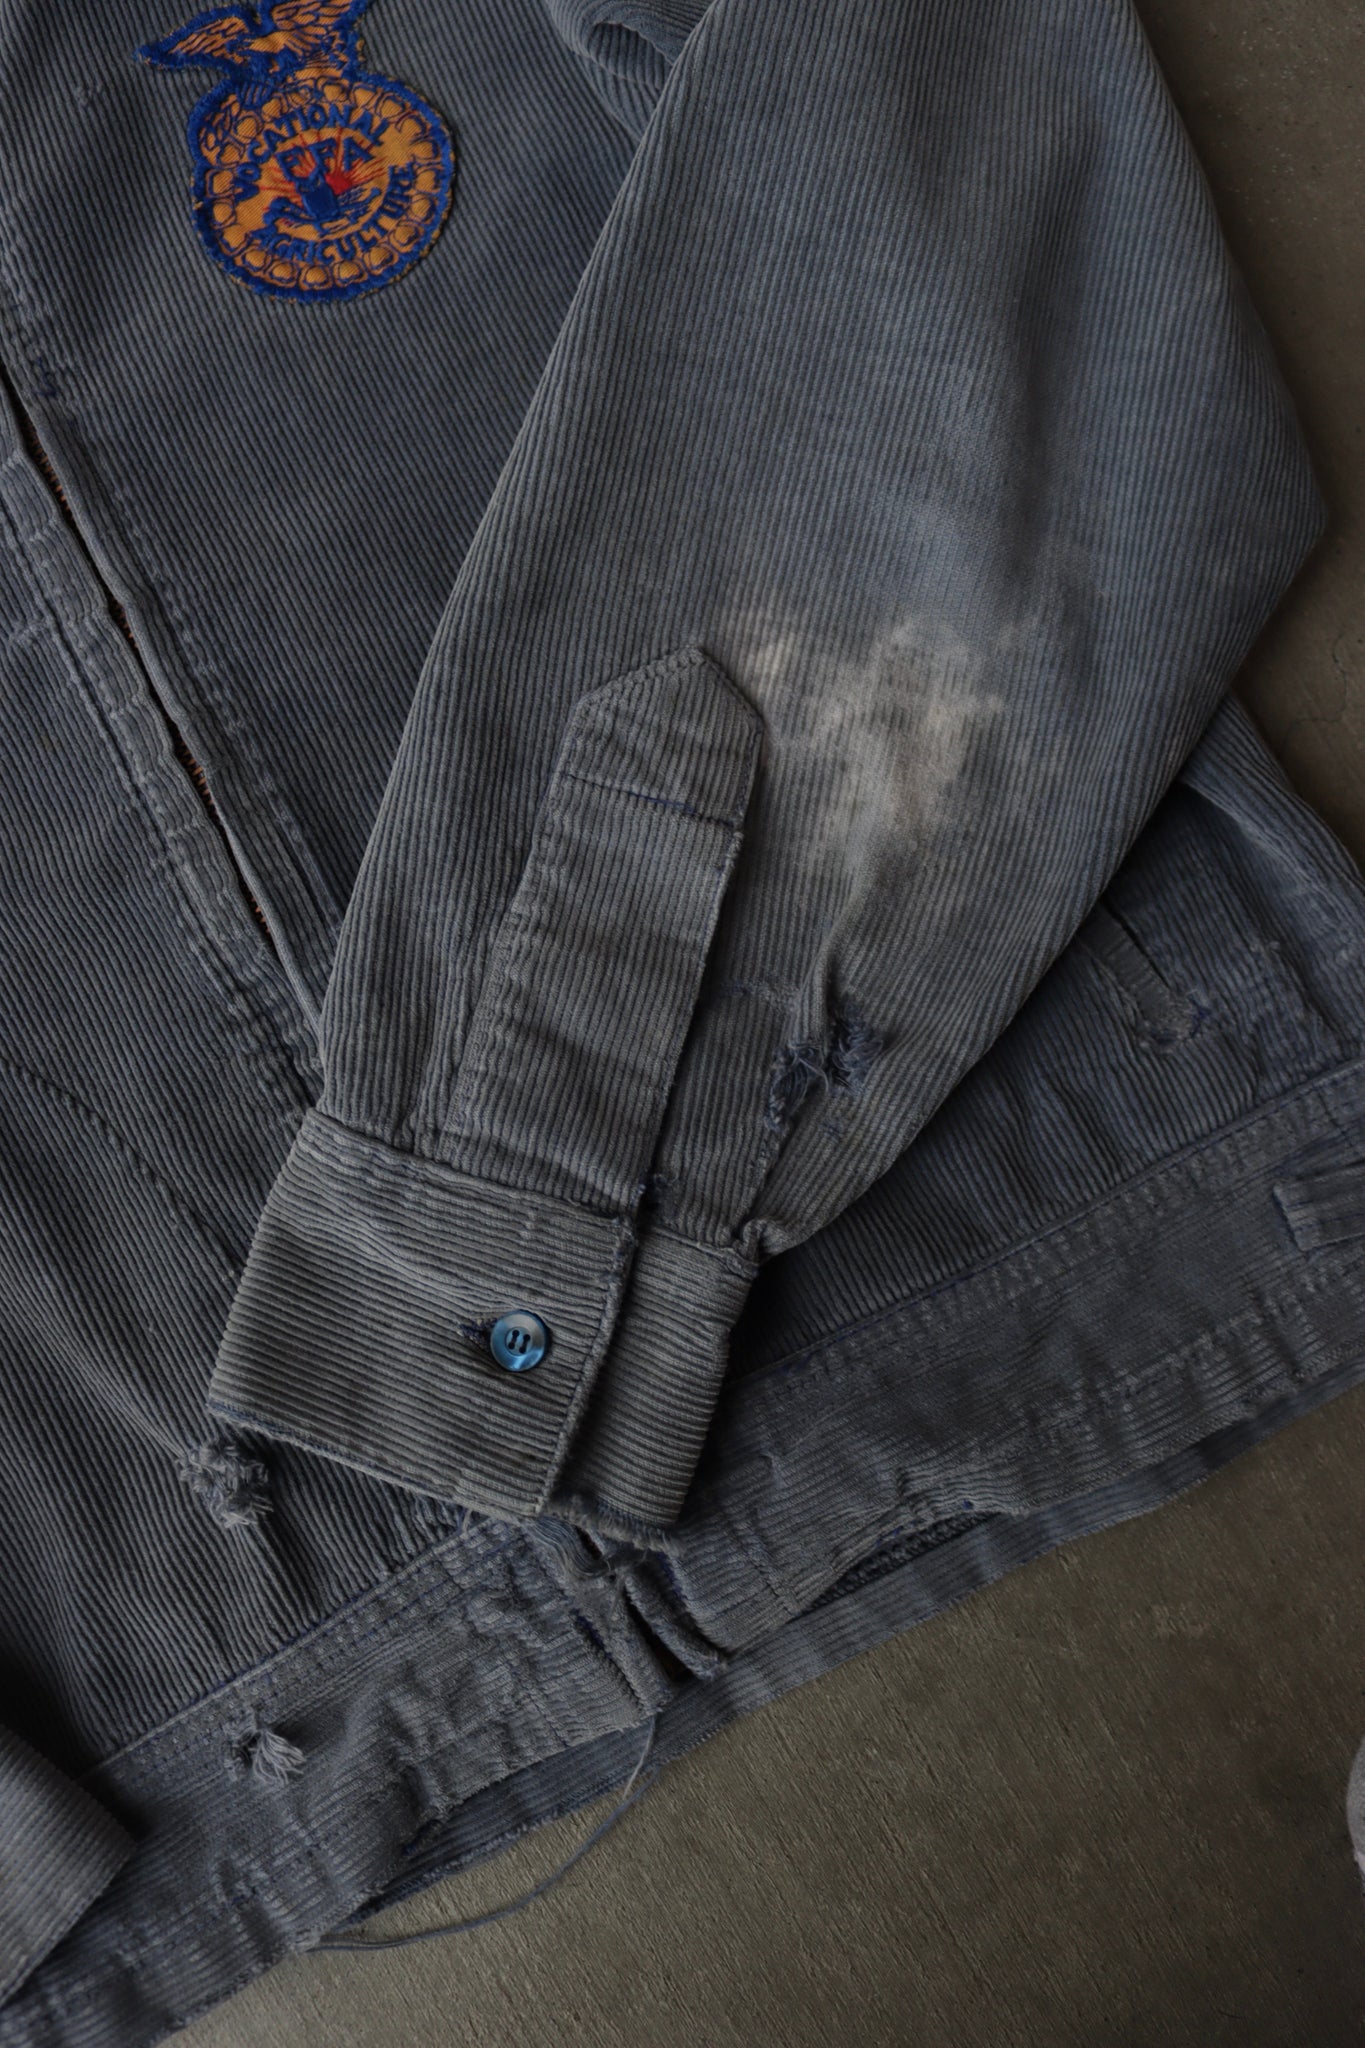 1950s Faded & Repaired Fatigue Blue FFA Chainstitch Jacket - M/L